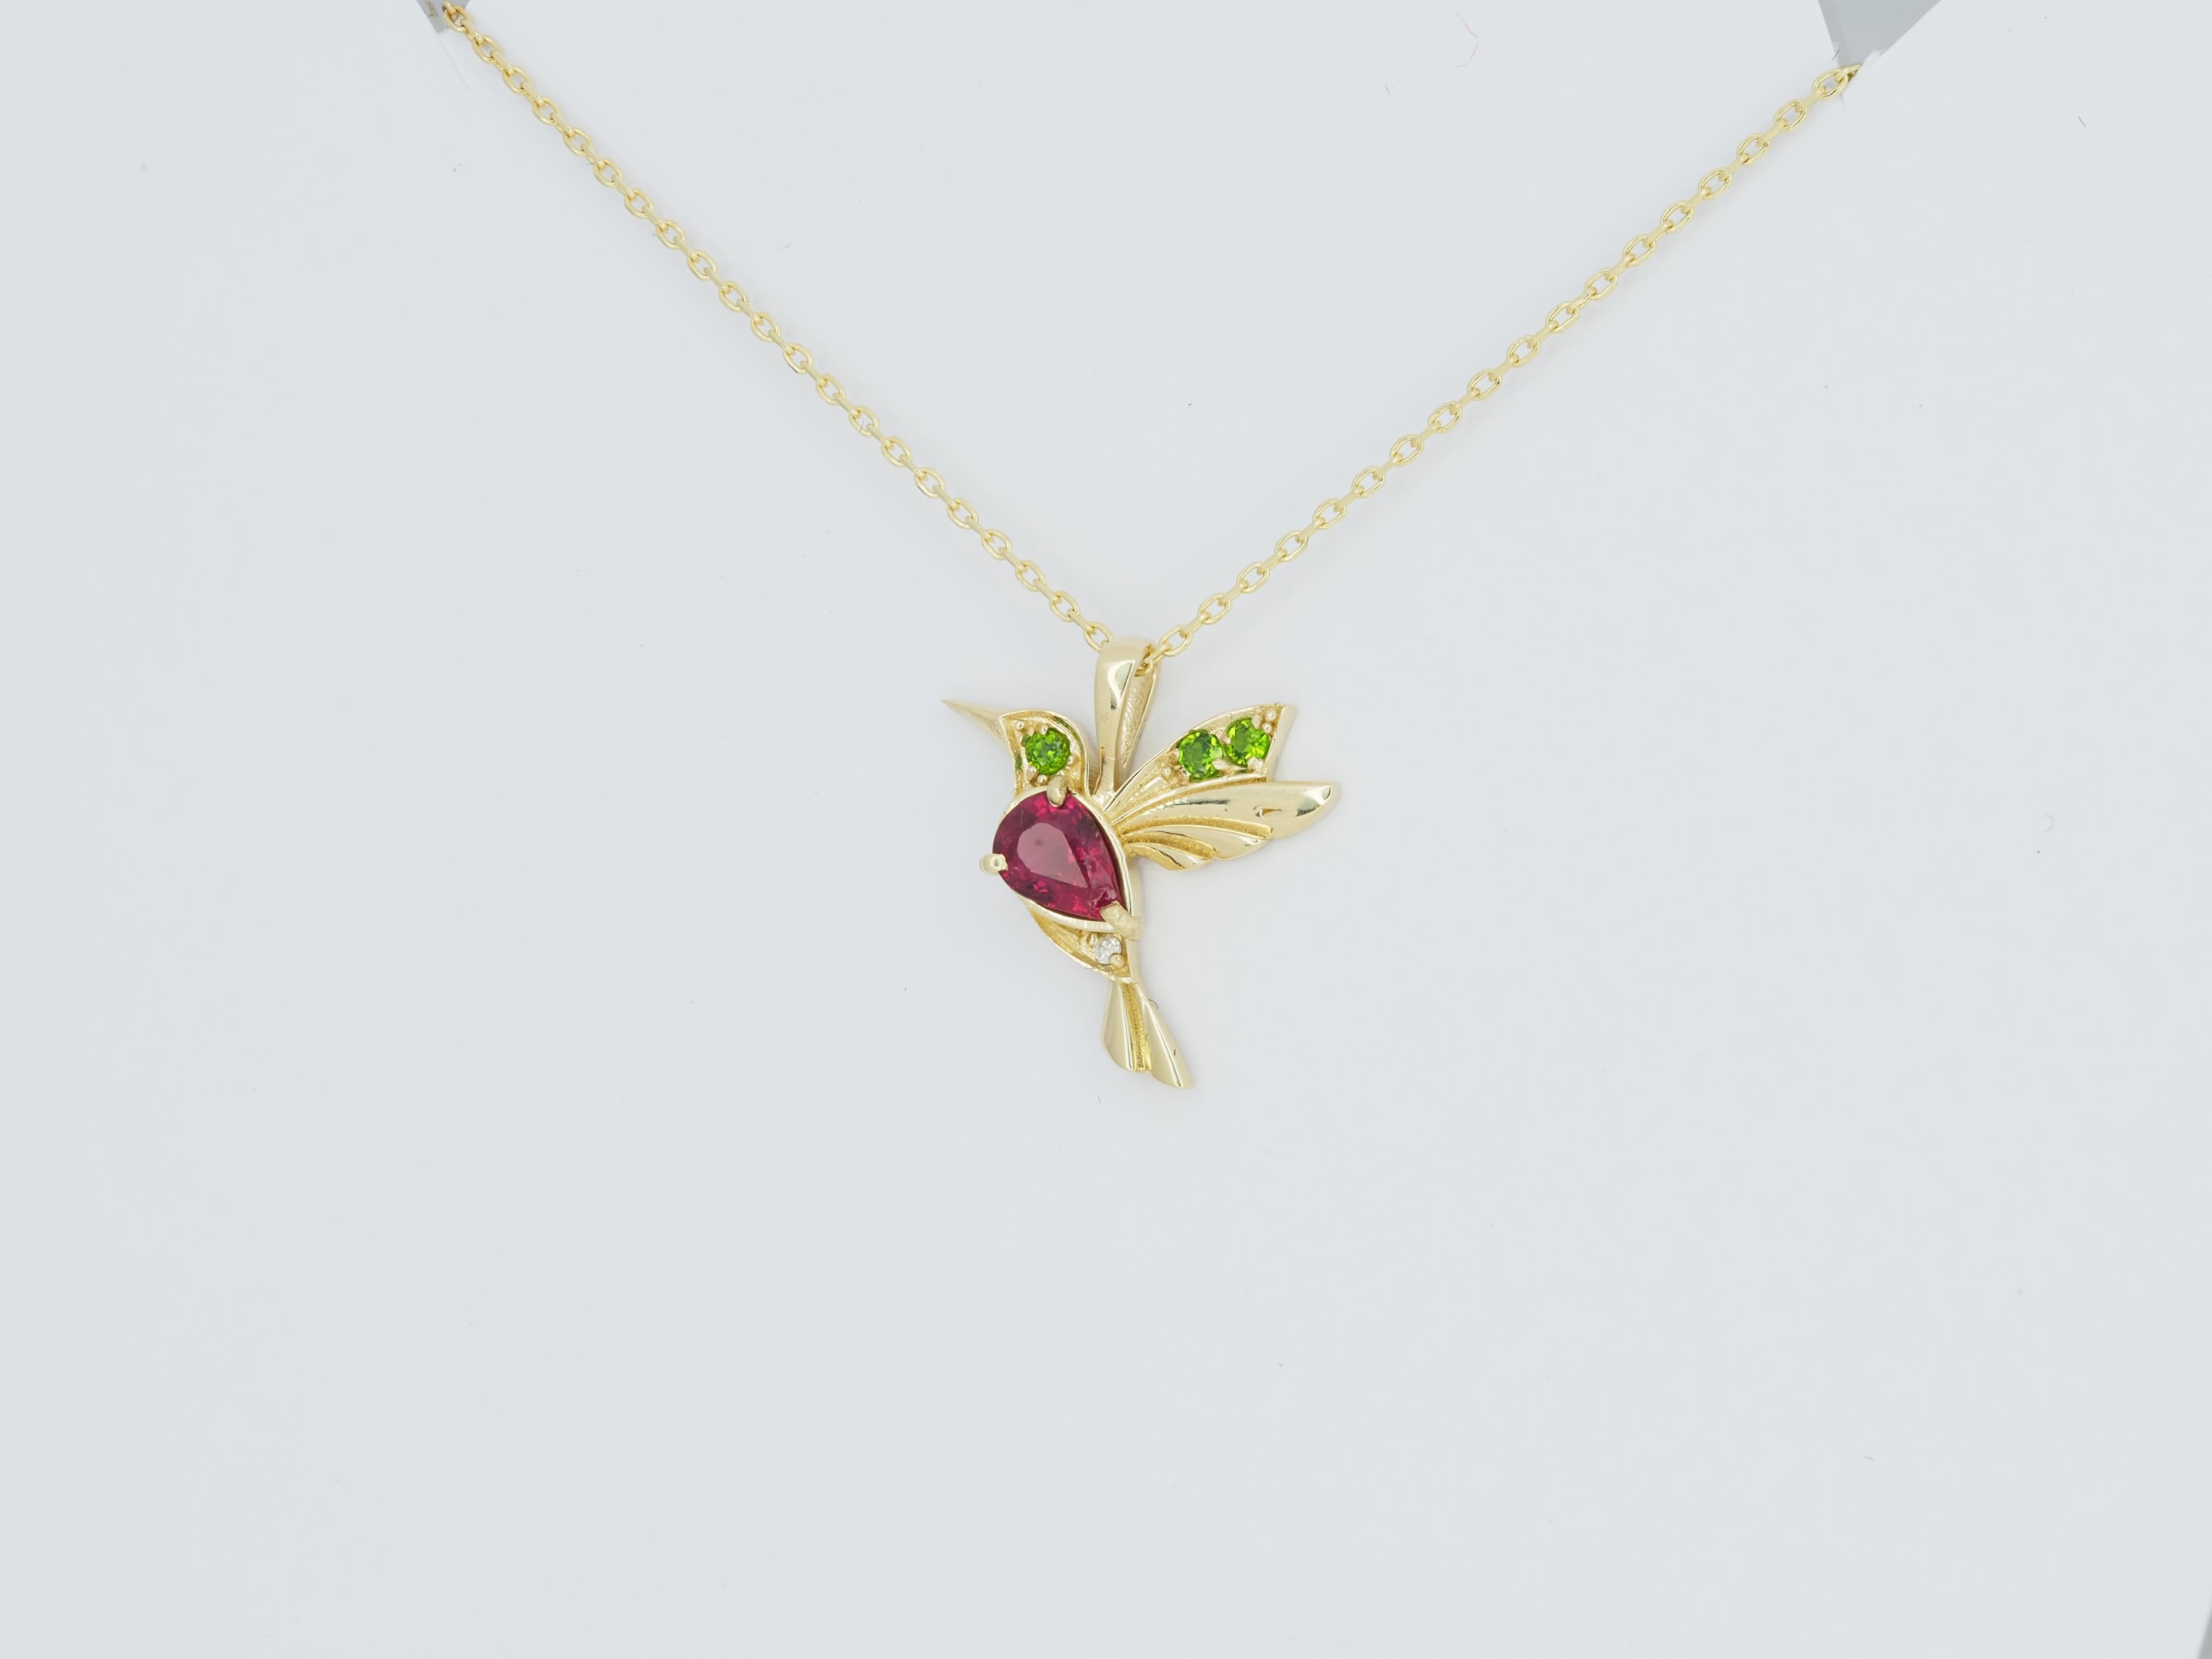 14k Gold Hummingbird Pendant with Rubies, Bird Pendant with Colored Gemstones For Sale 4